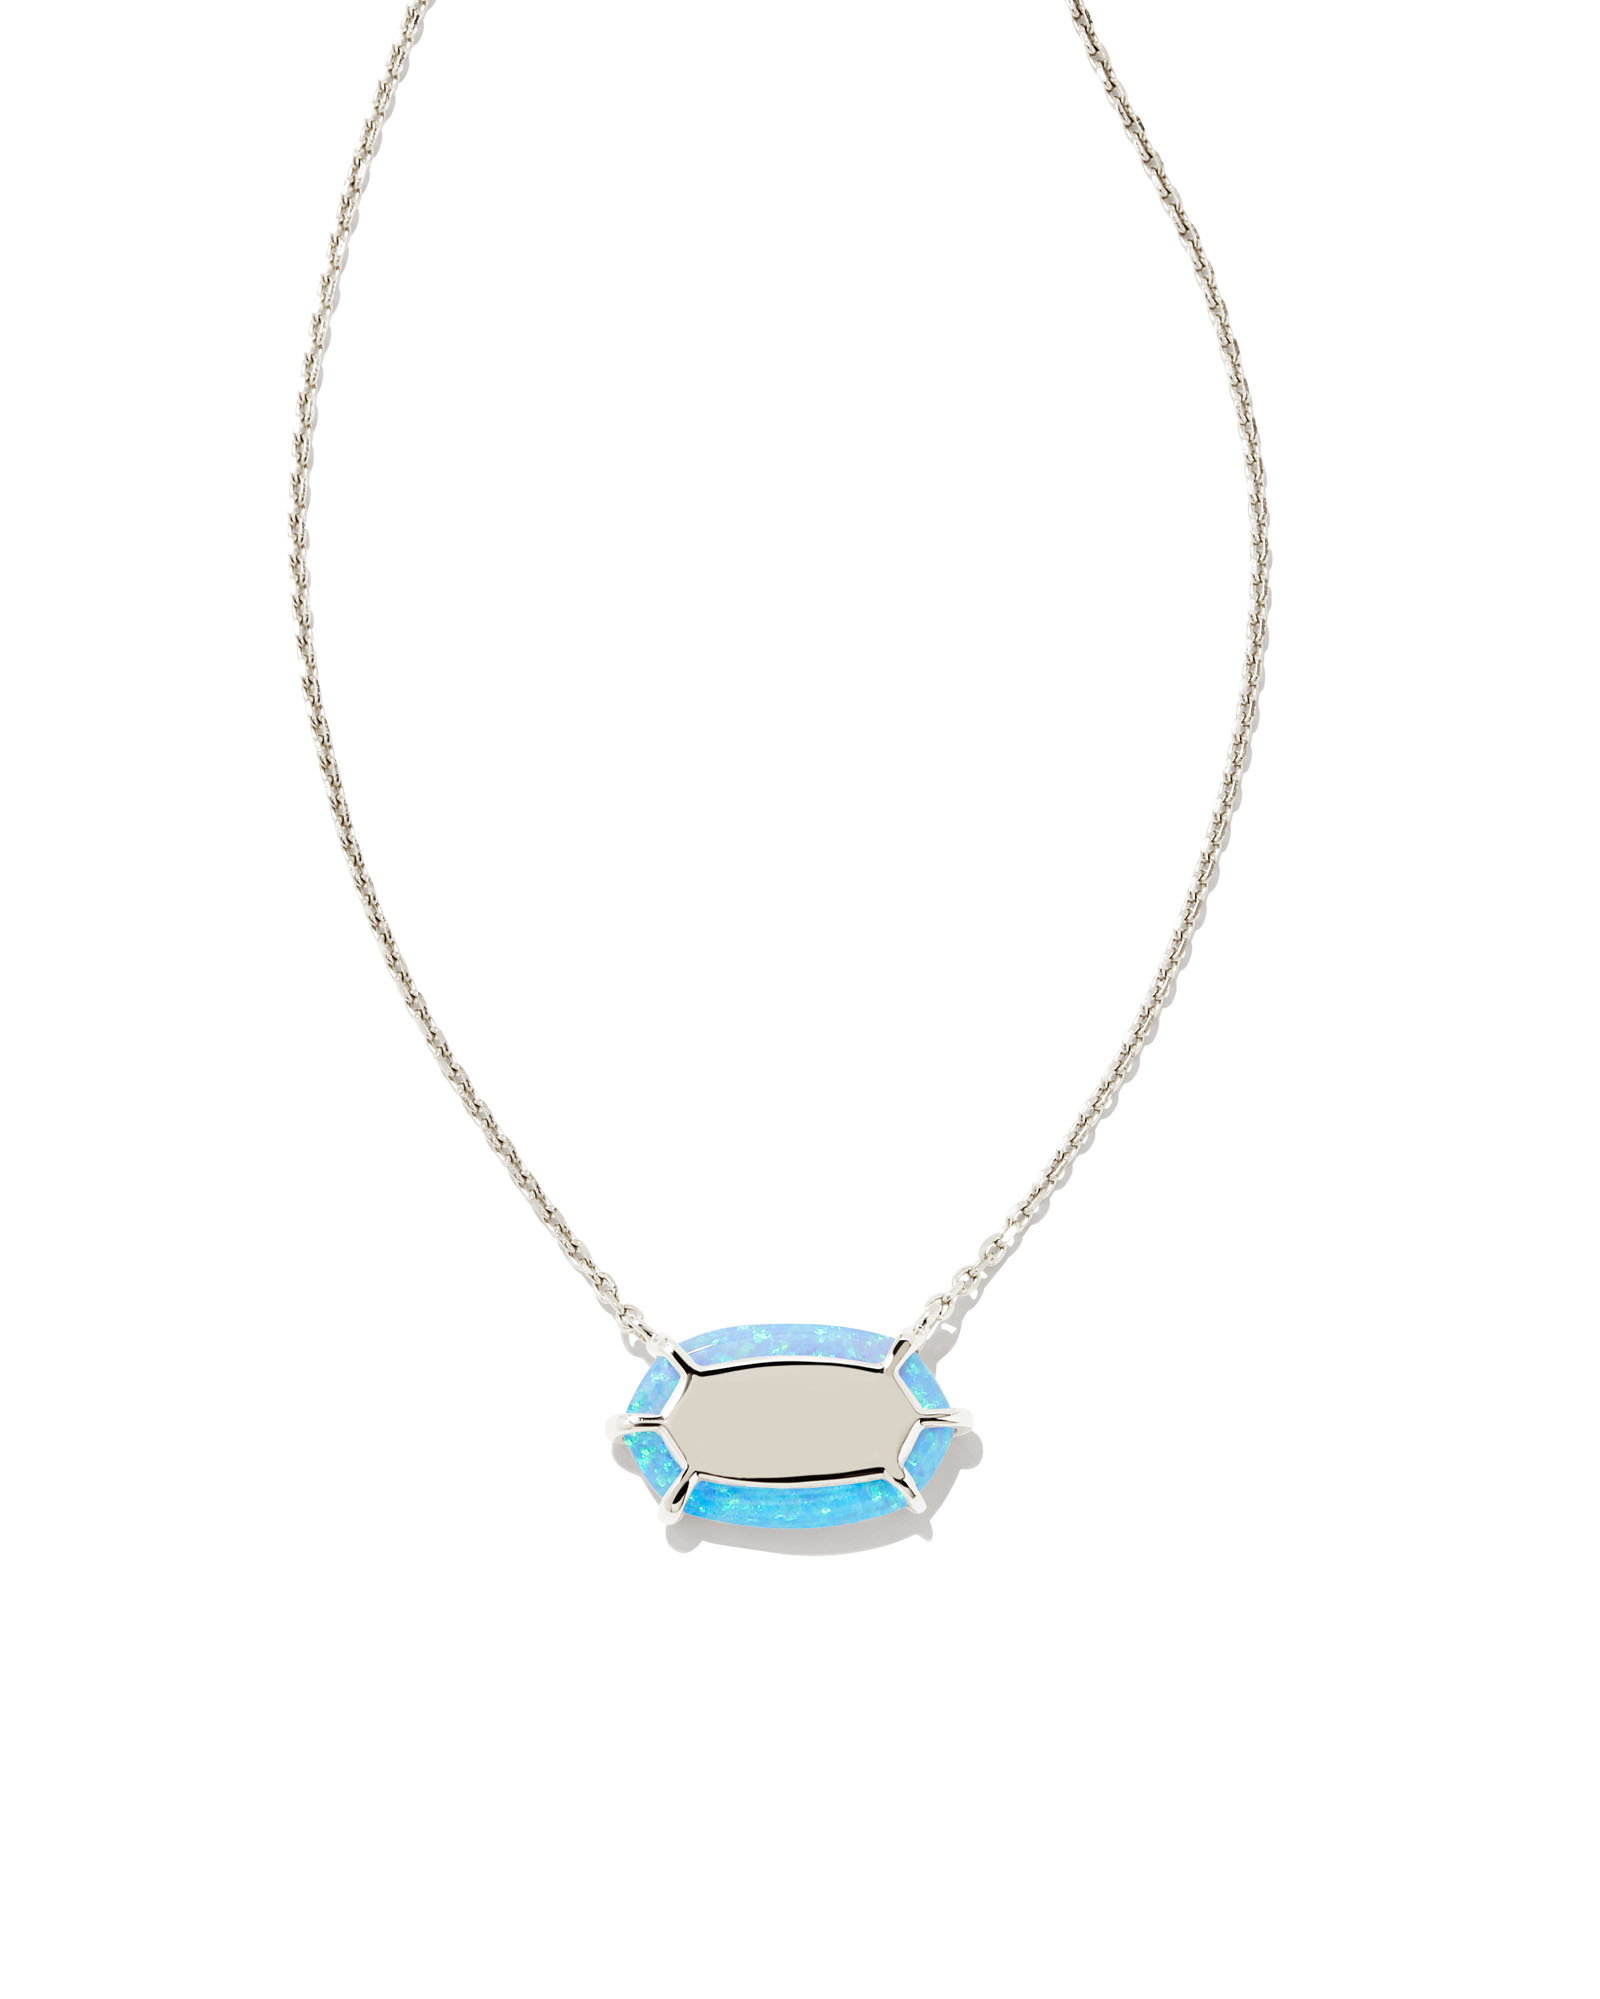 Kendra Scott Elisa Satellite Pendant Necklace in Coral Kyocera Simulated  Opal | REEDS Jewelers